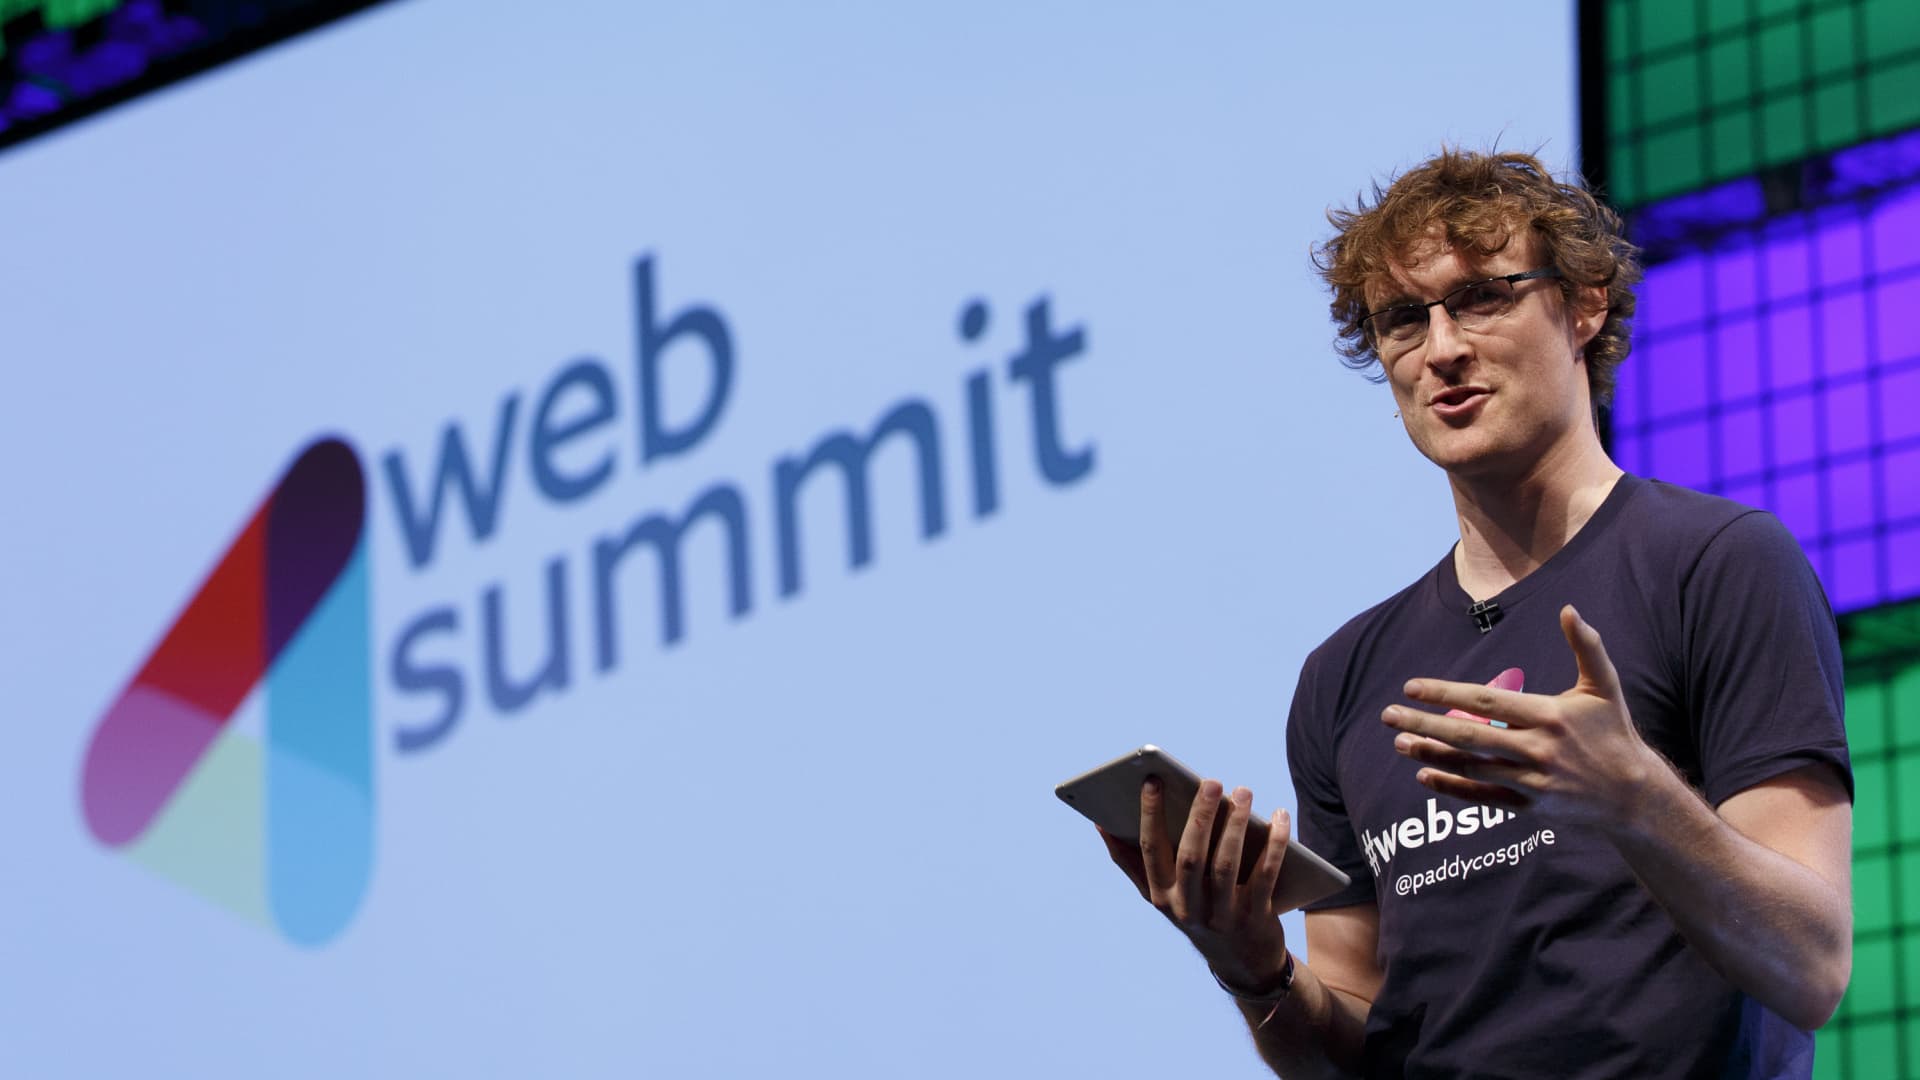 Web Summit CEO resigns after apologizing for Israel-Hamas war comments